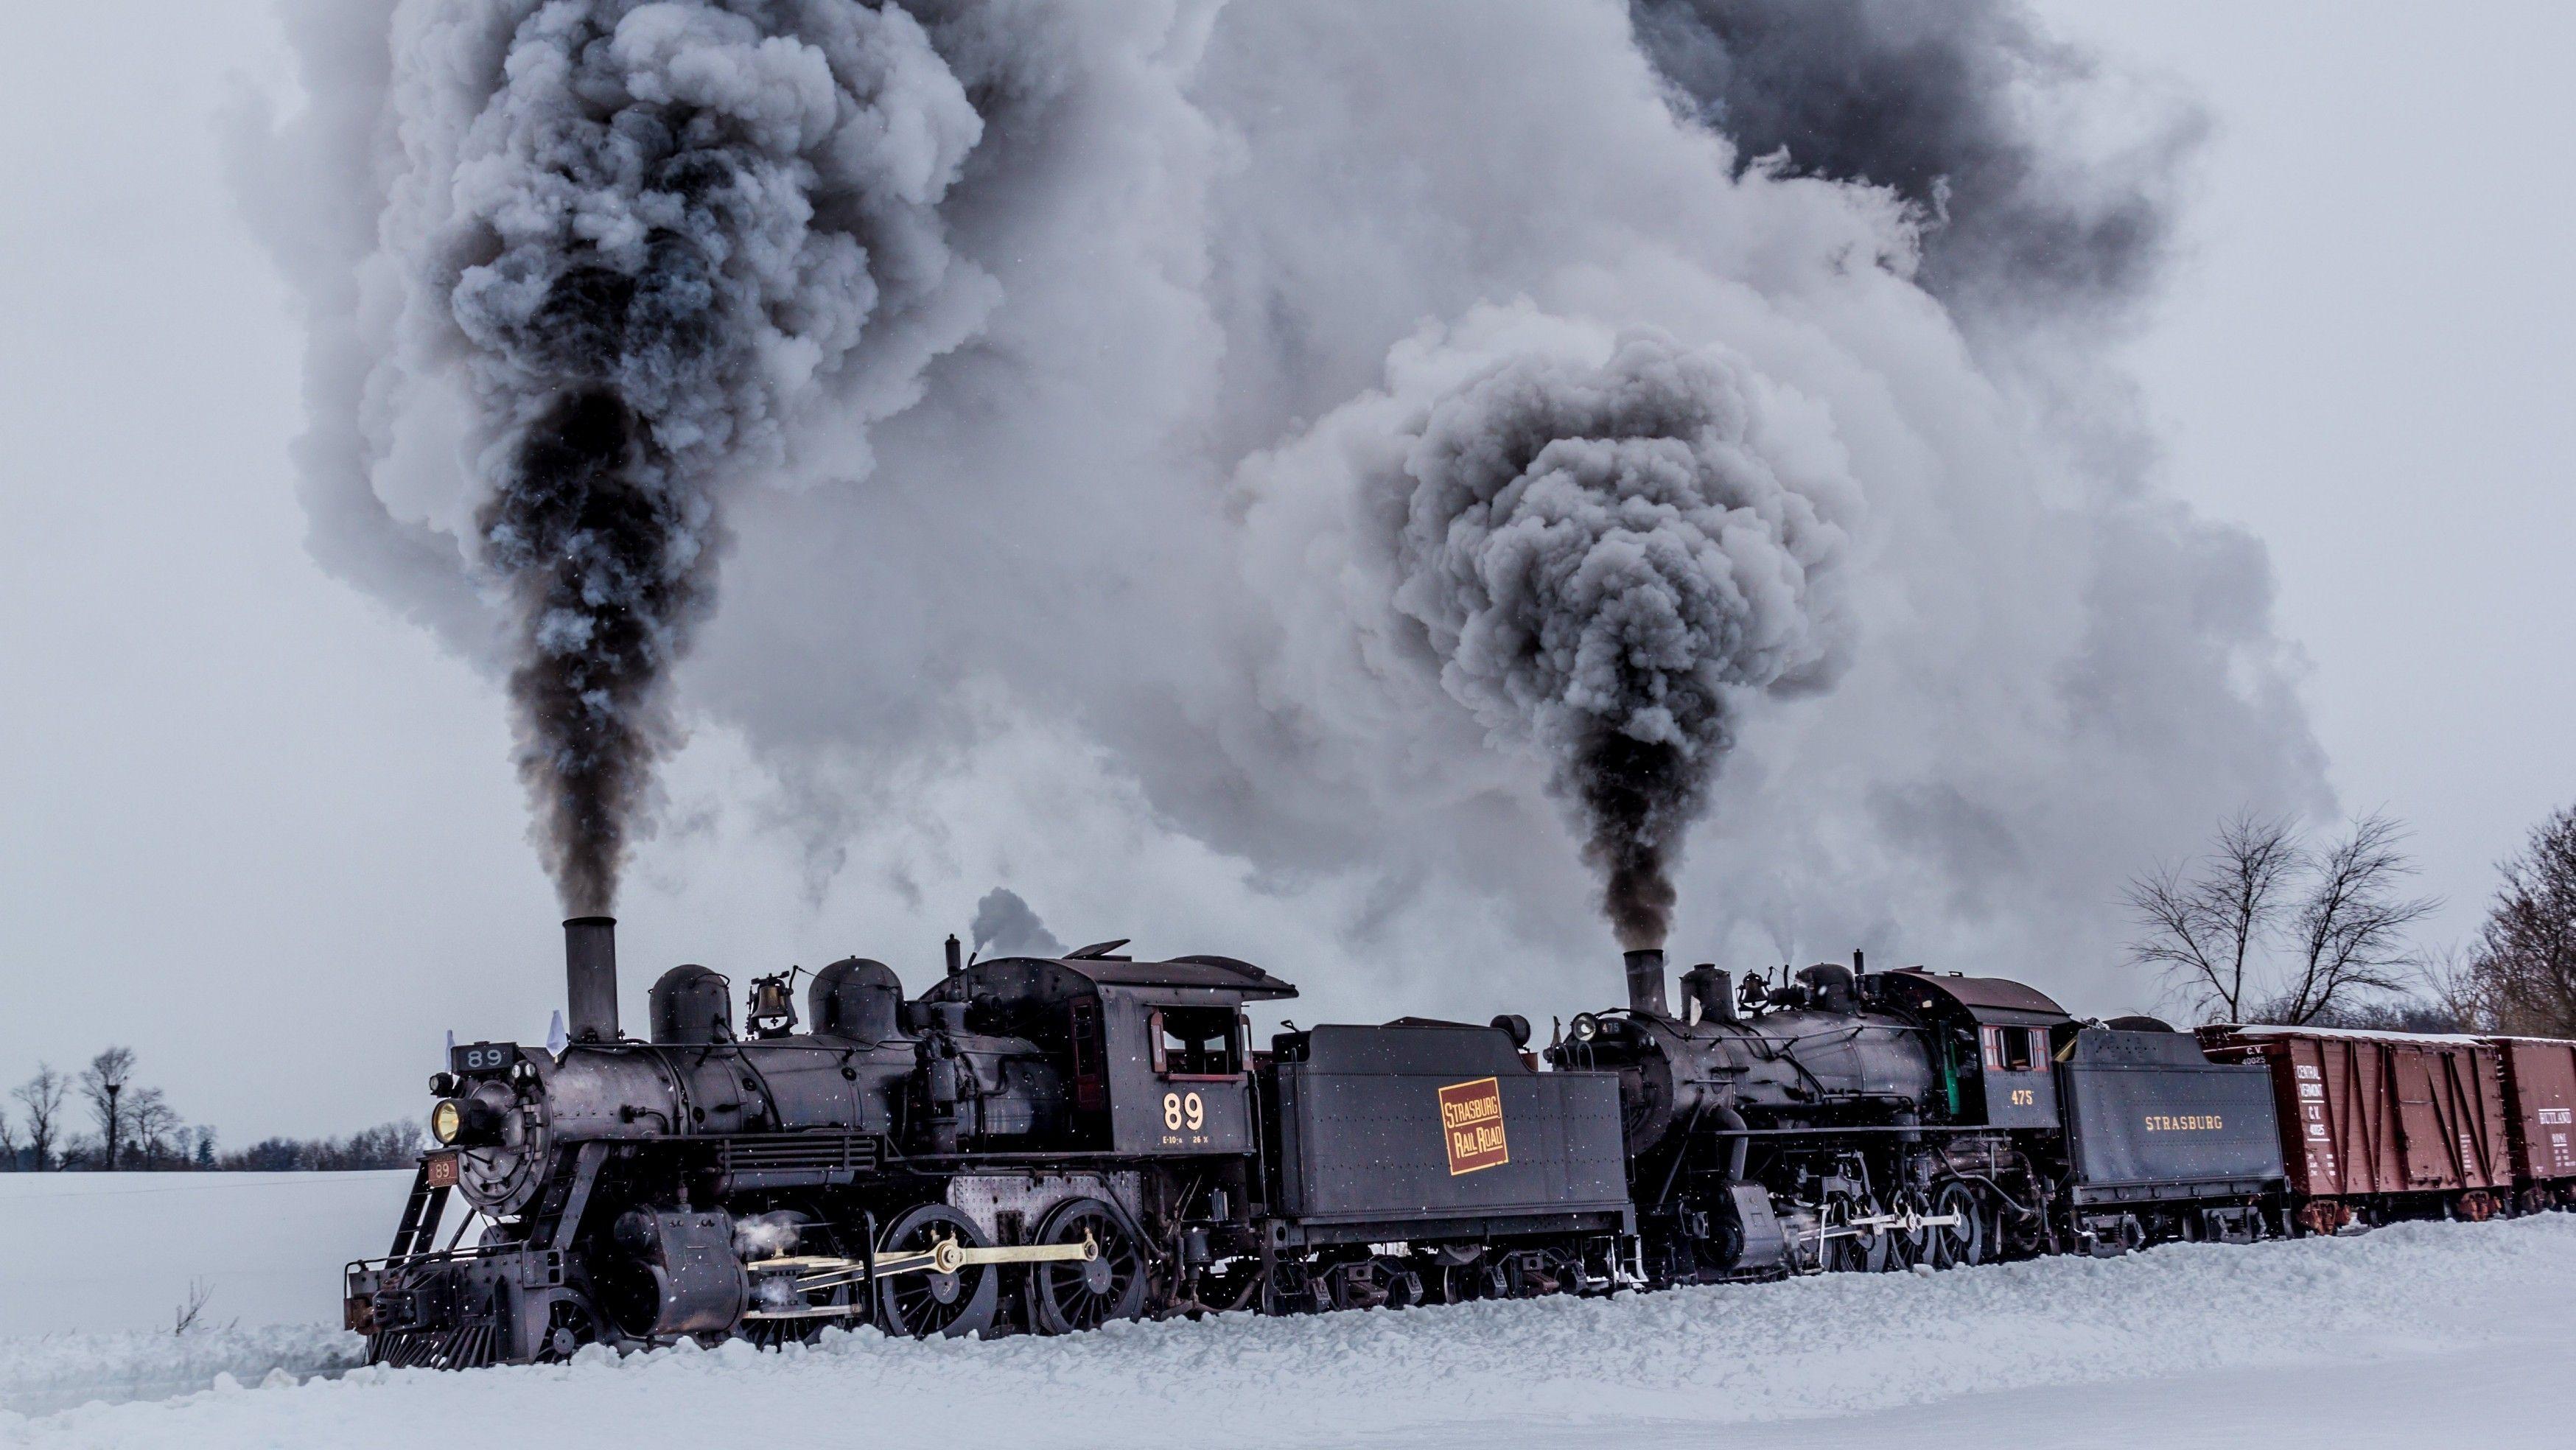 Page 2 | 79,000+ Winter Train Excursion Pictures